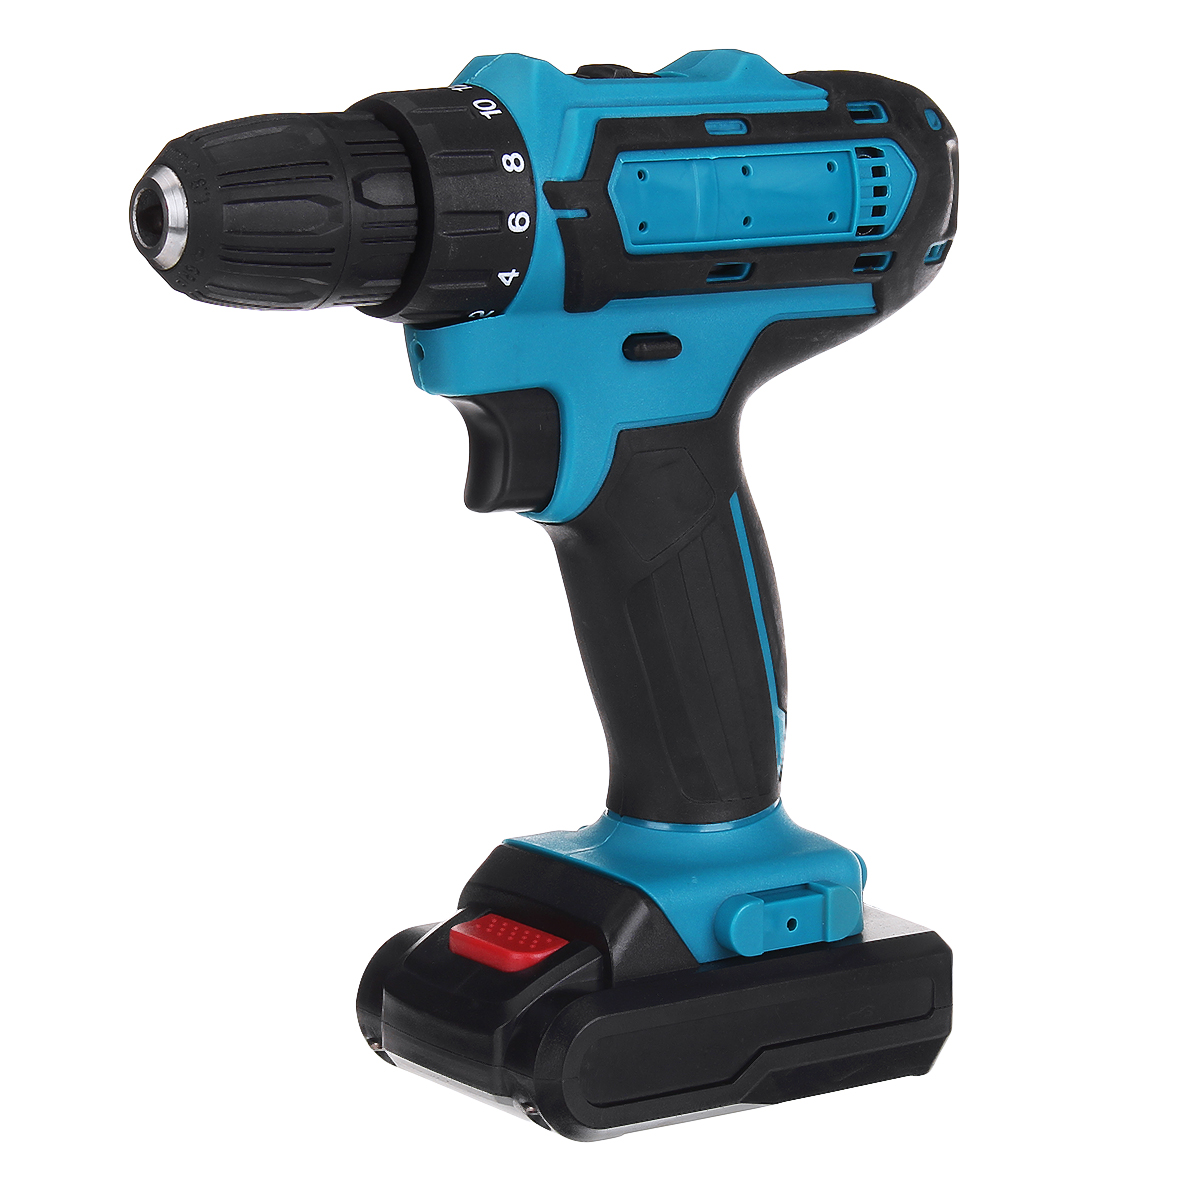 

48V 2 Speed Power Drills Drilling Tool Rechargeable Cordless Electric Drill Driver 28NM 6500mAh with box